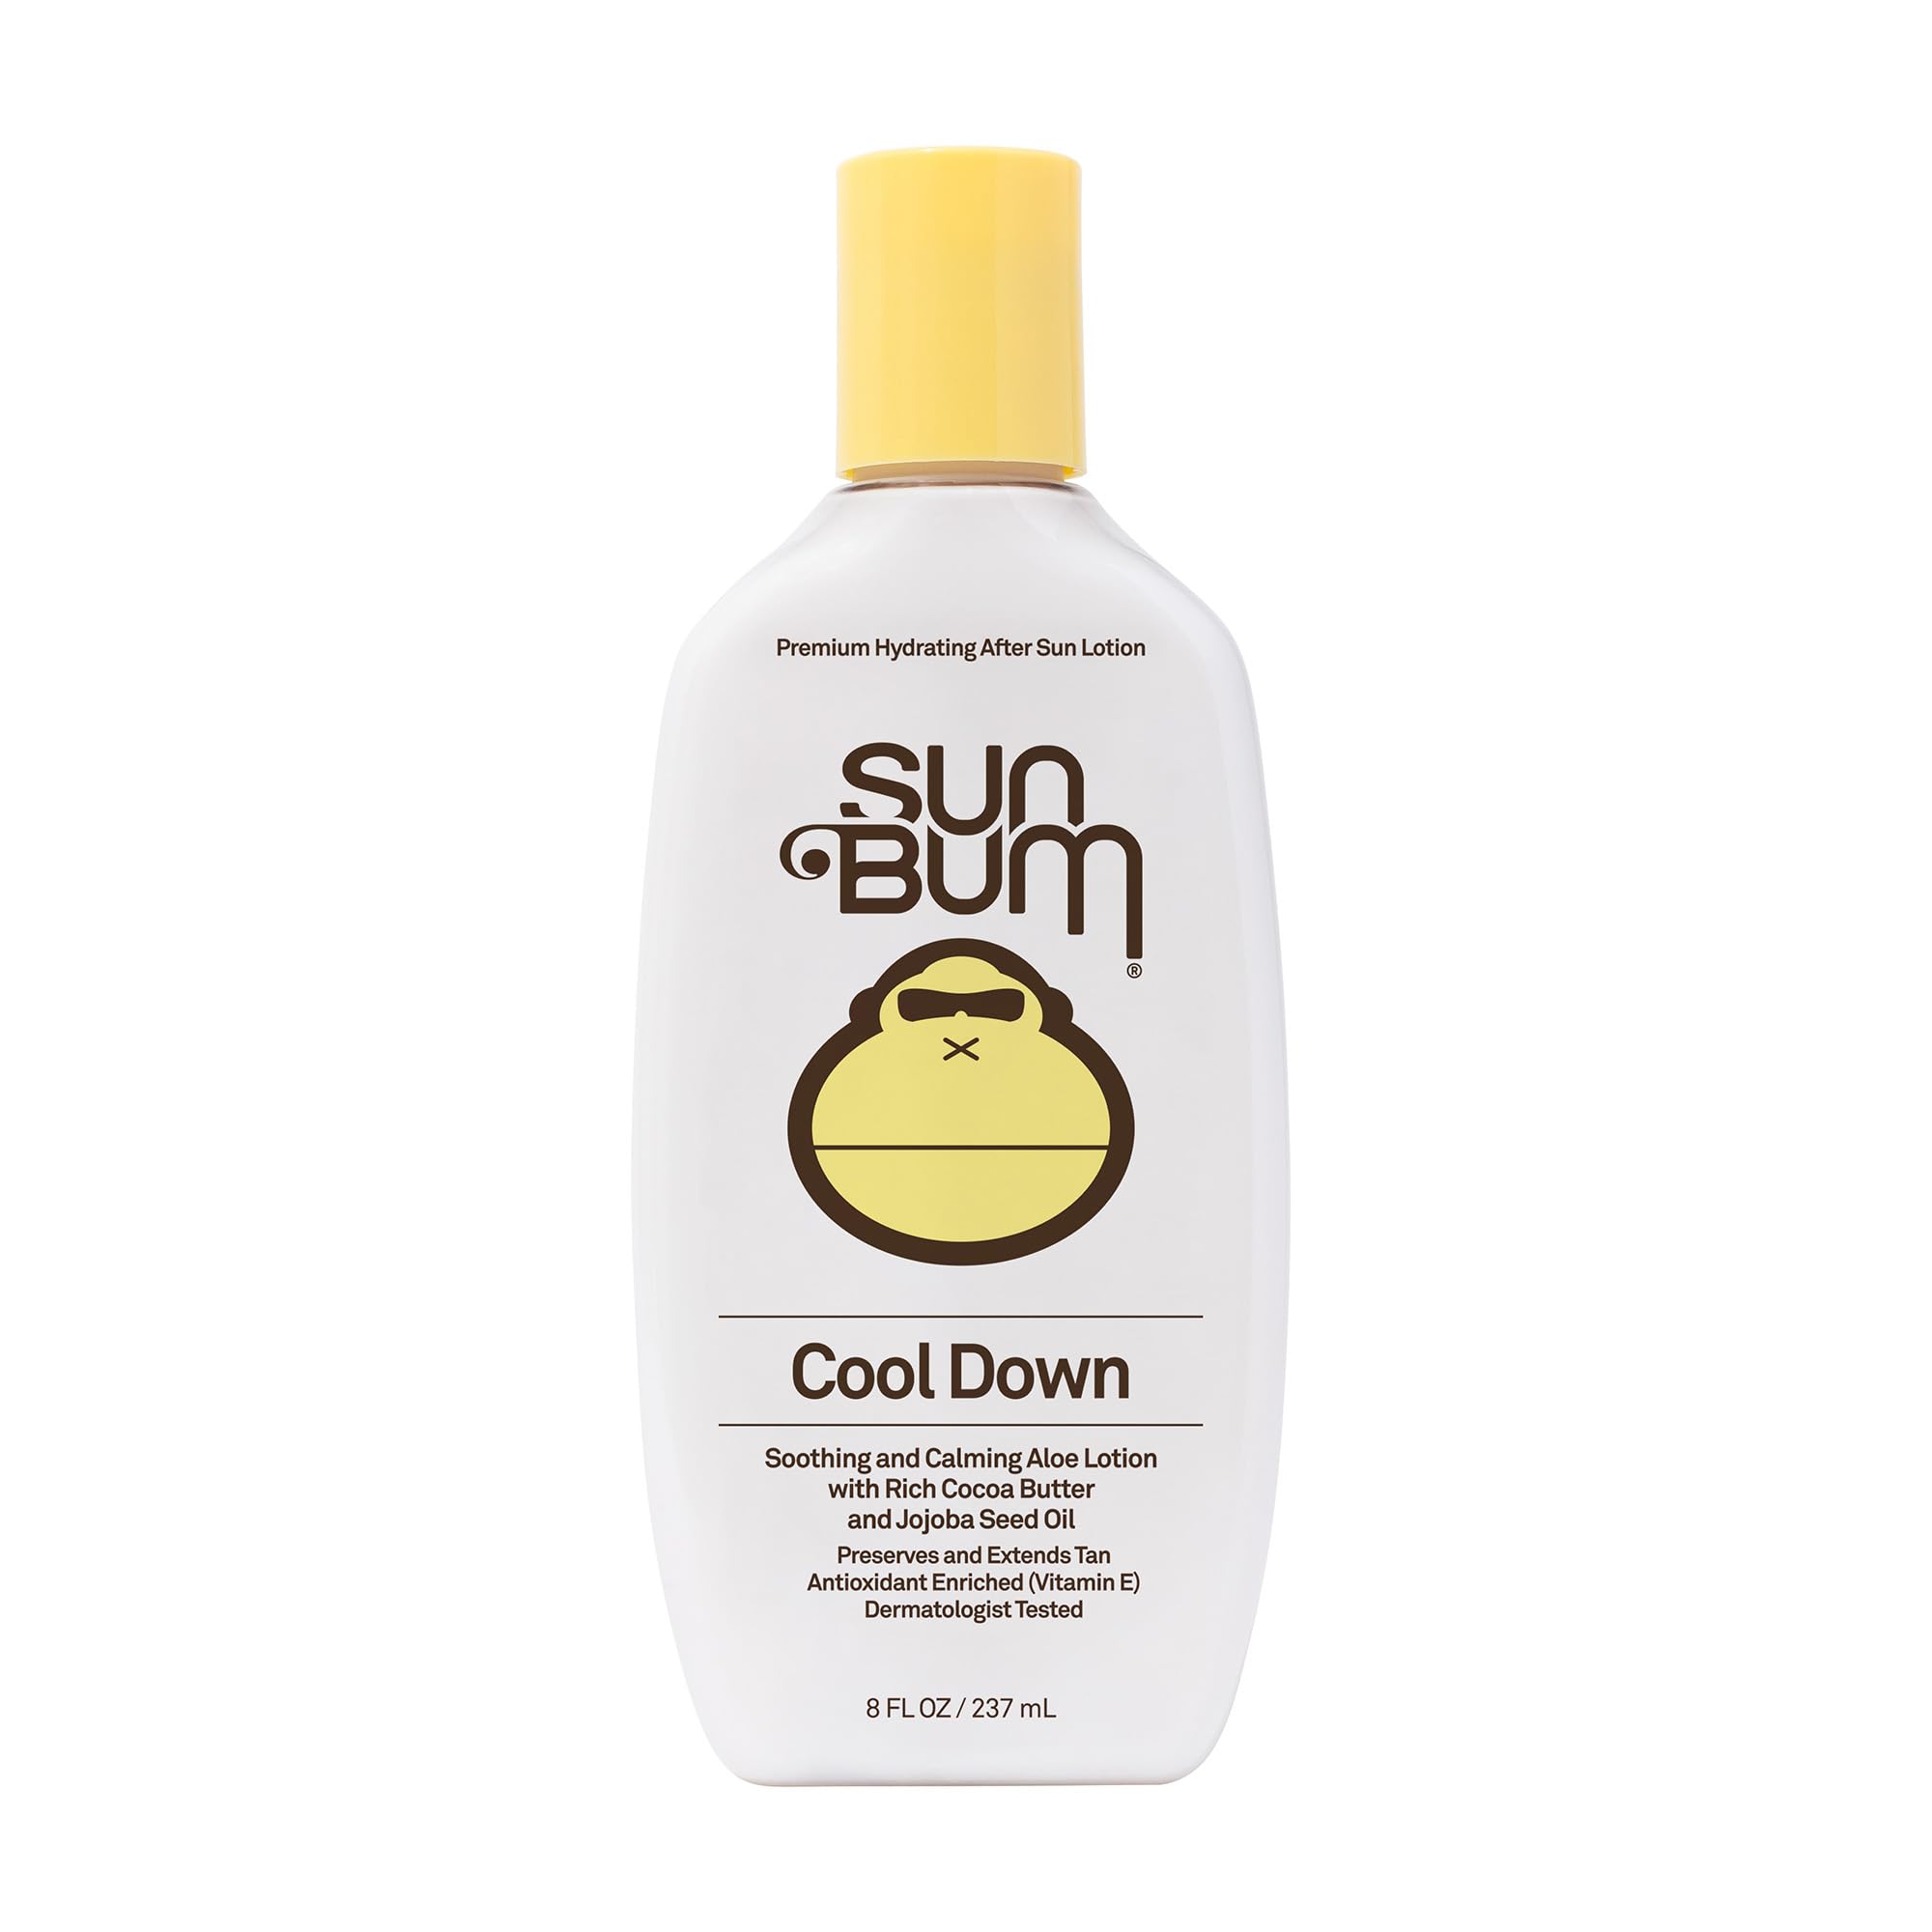 8-Oz Sun Bum Cool Down Aloe Lotion w/ Cocoa Butter to Soothe & Hydrate Sunburn Pain $8.80 w/ S&S + Free Shipping w/ Prime or on $35+